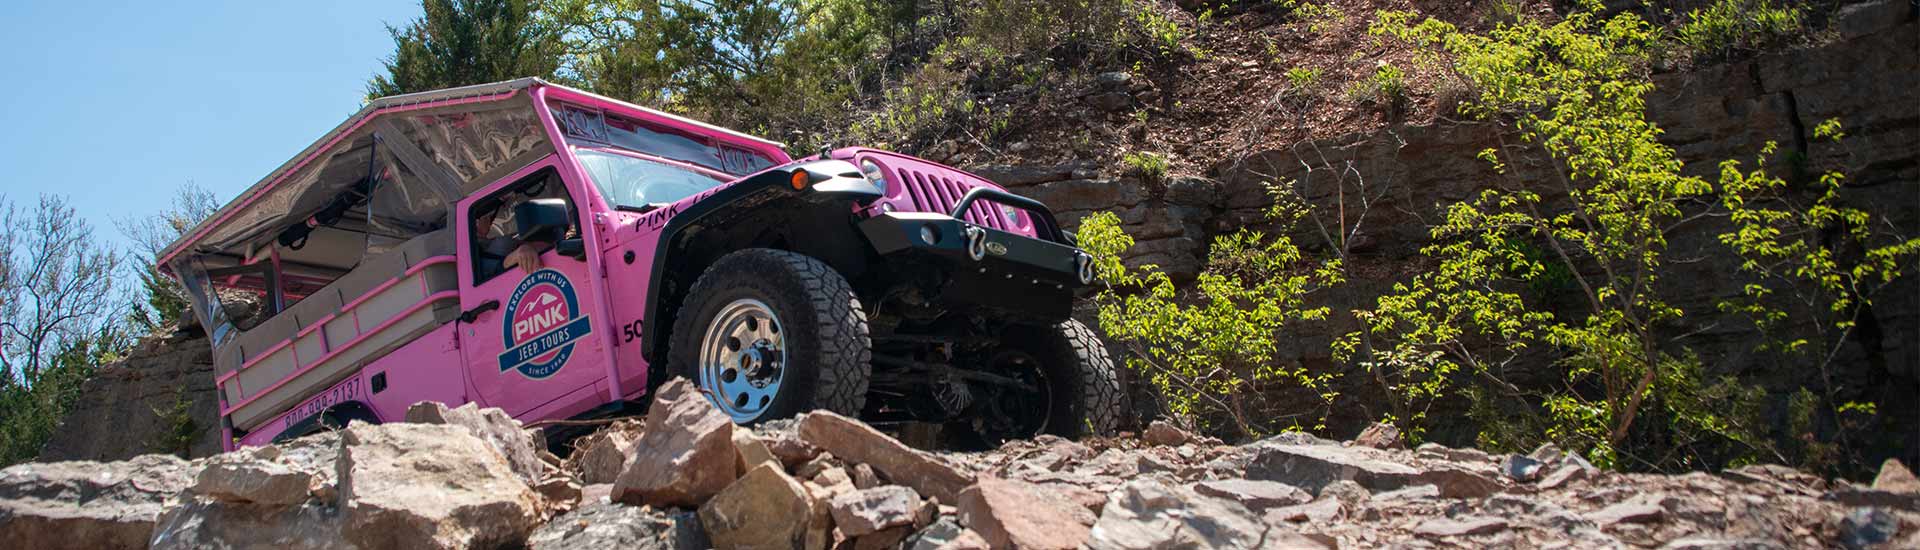 Side view of Pink Jeep Wrangler ascending a steep rocky incline during the Ozark Mountain Crawl Branson Tour..